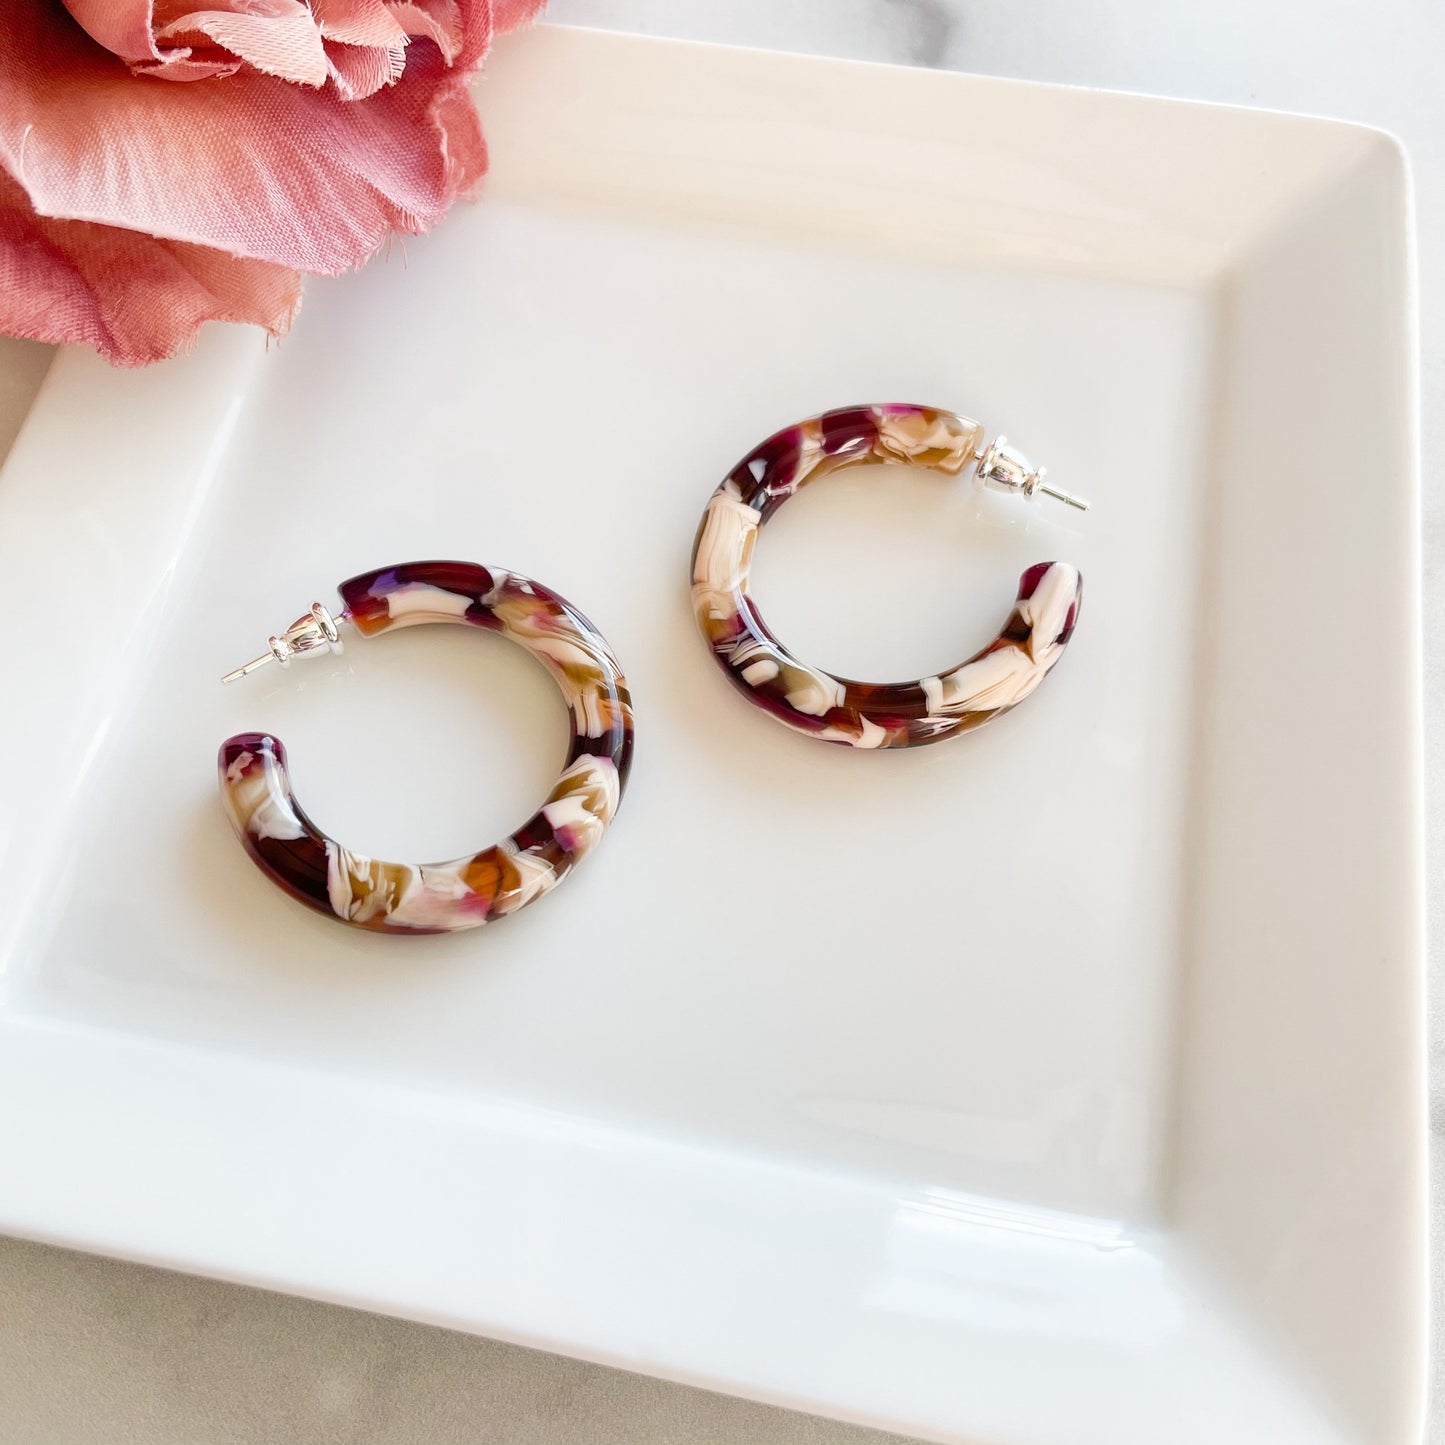 35mm Round Hoops in Autumn | Floral Red Cream Acetate Tortoise Shell Hoop Earrings 925 Sterling Silver Posts